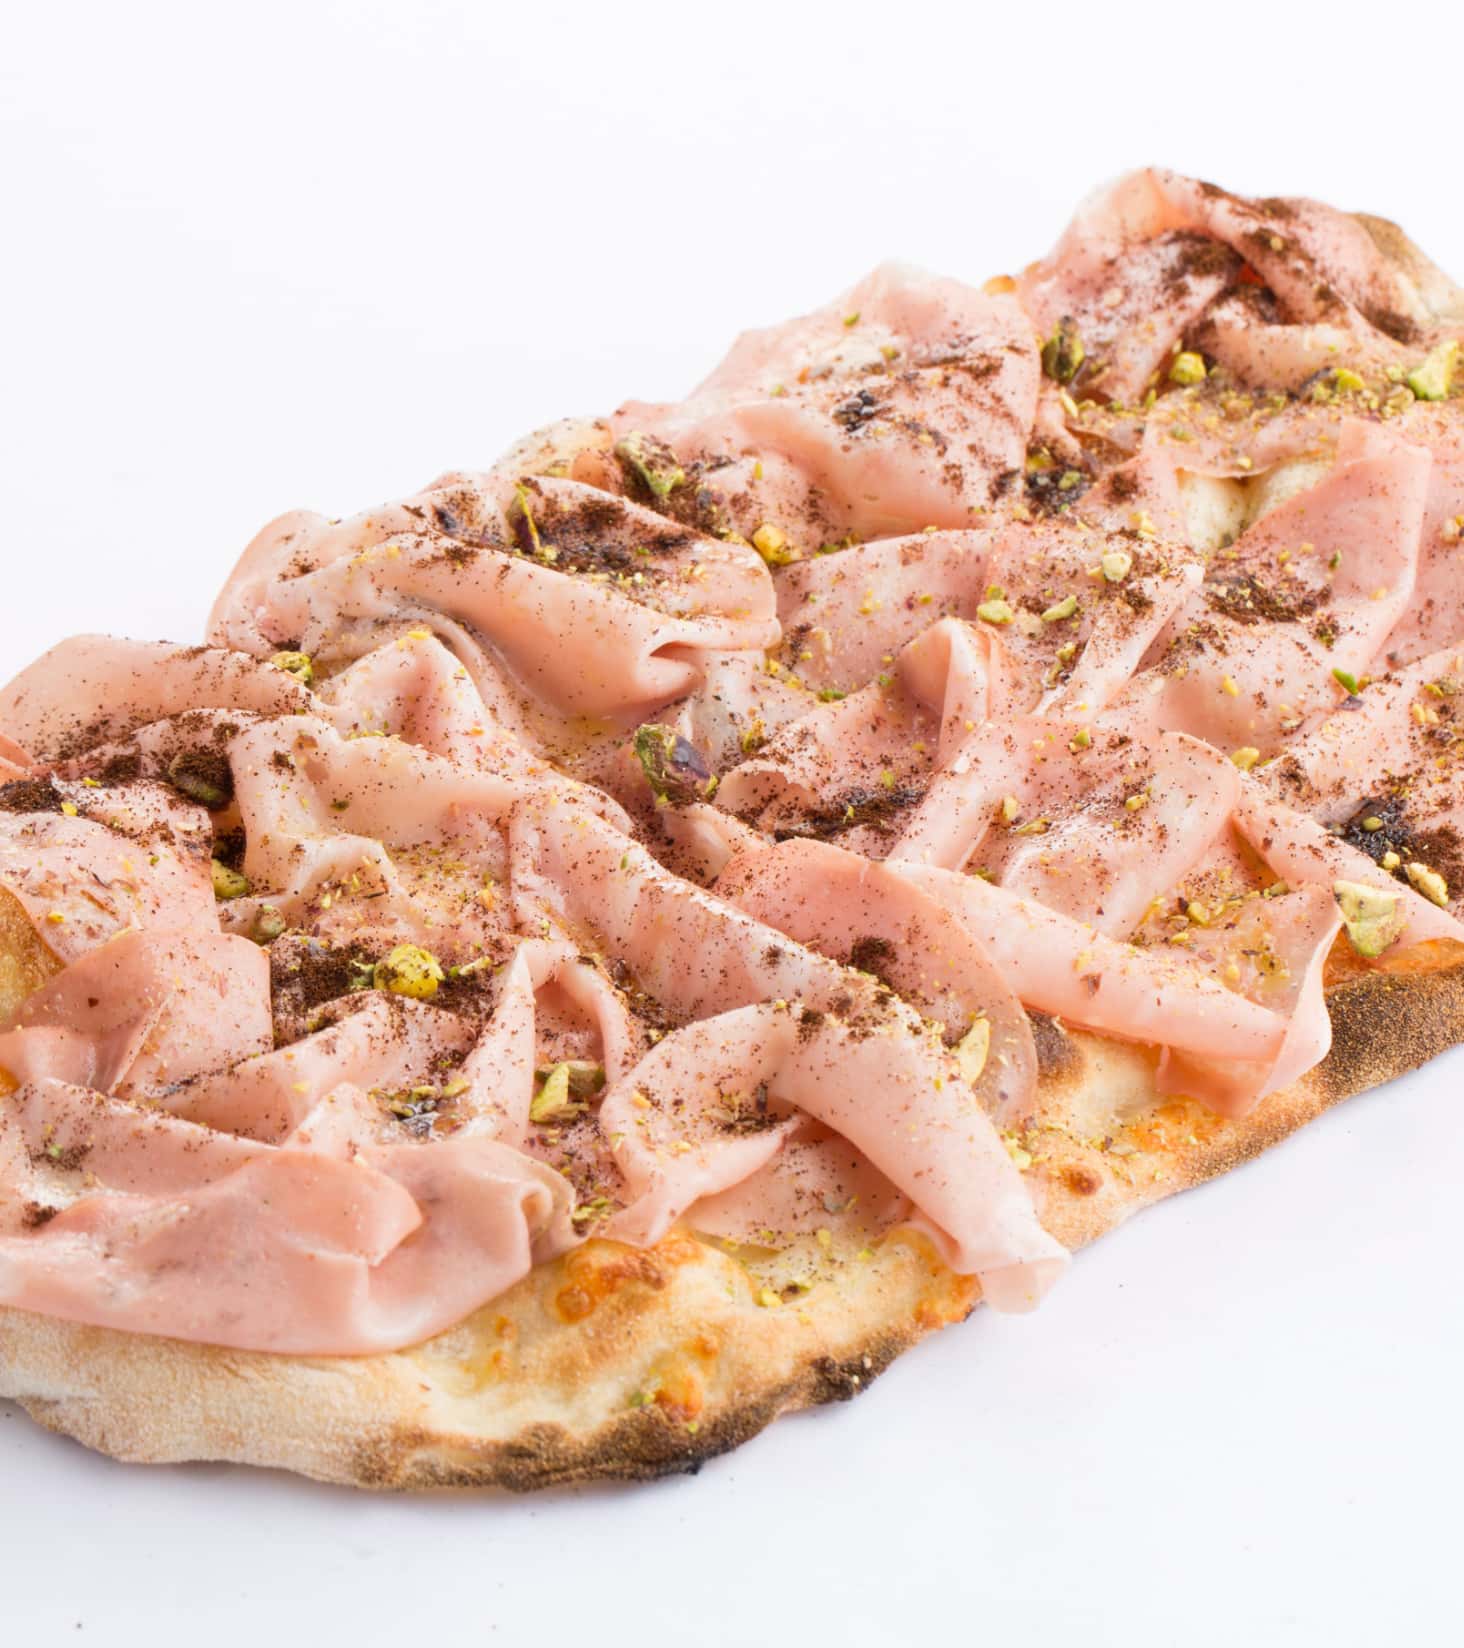 Photo of a Pinsa topped with pistachios and mortadella.